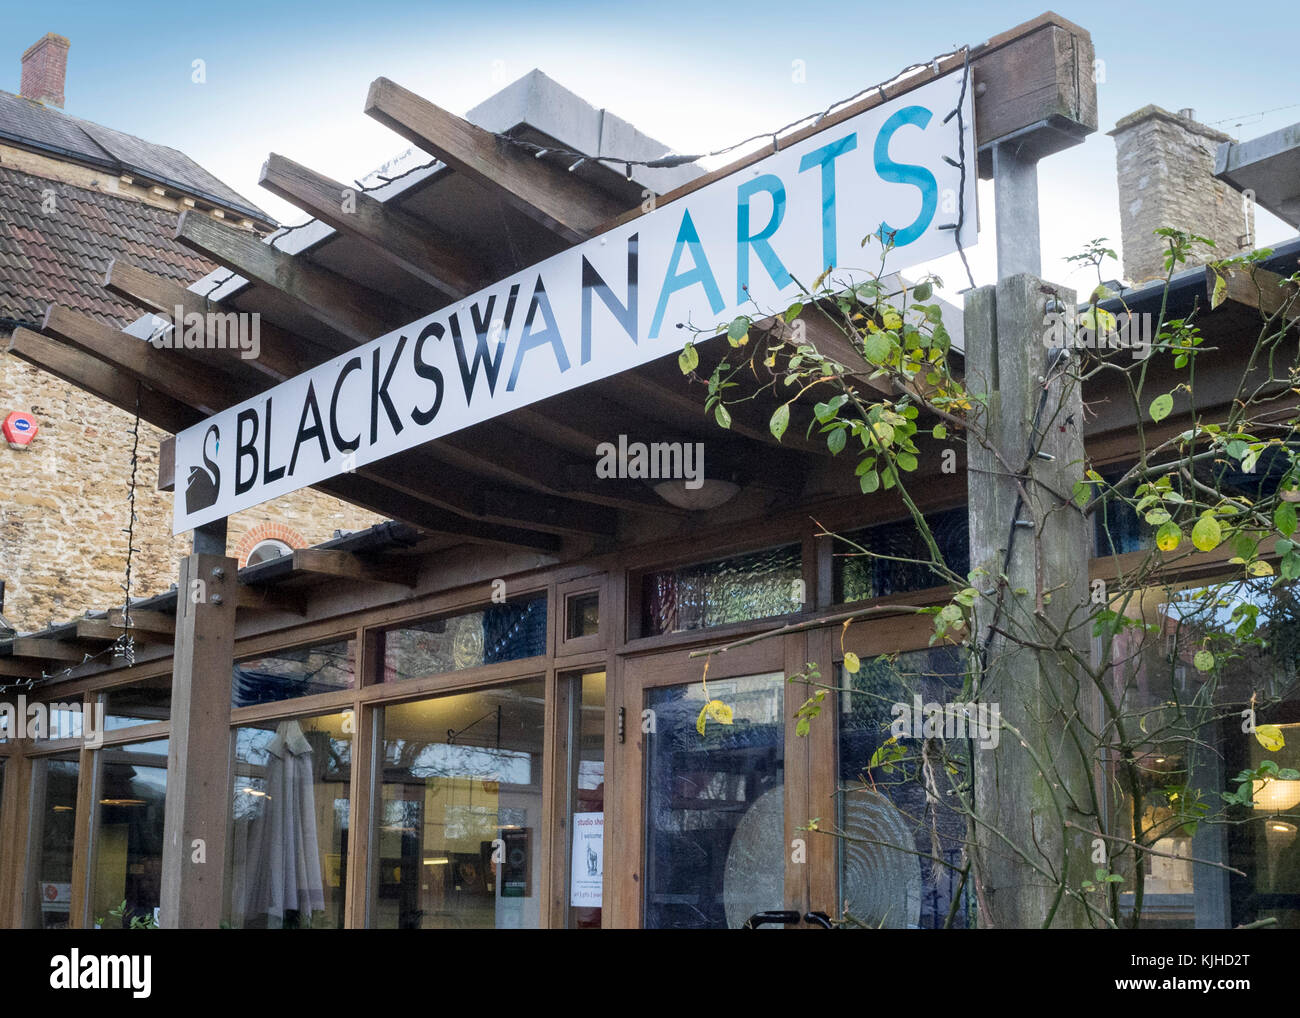 Black Swan Arts and Cafe, Frome, Somerset, England Stock Photo